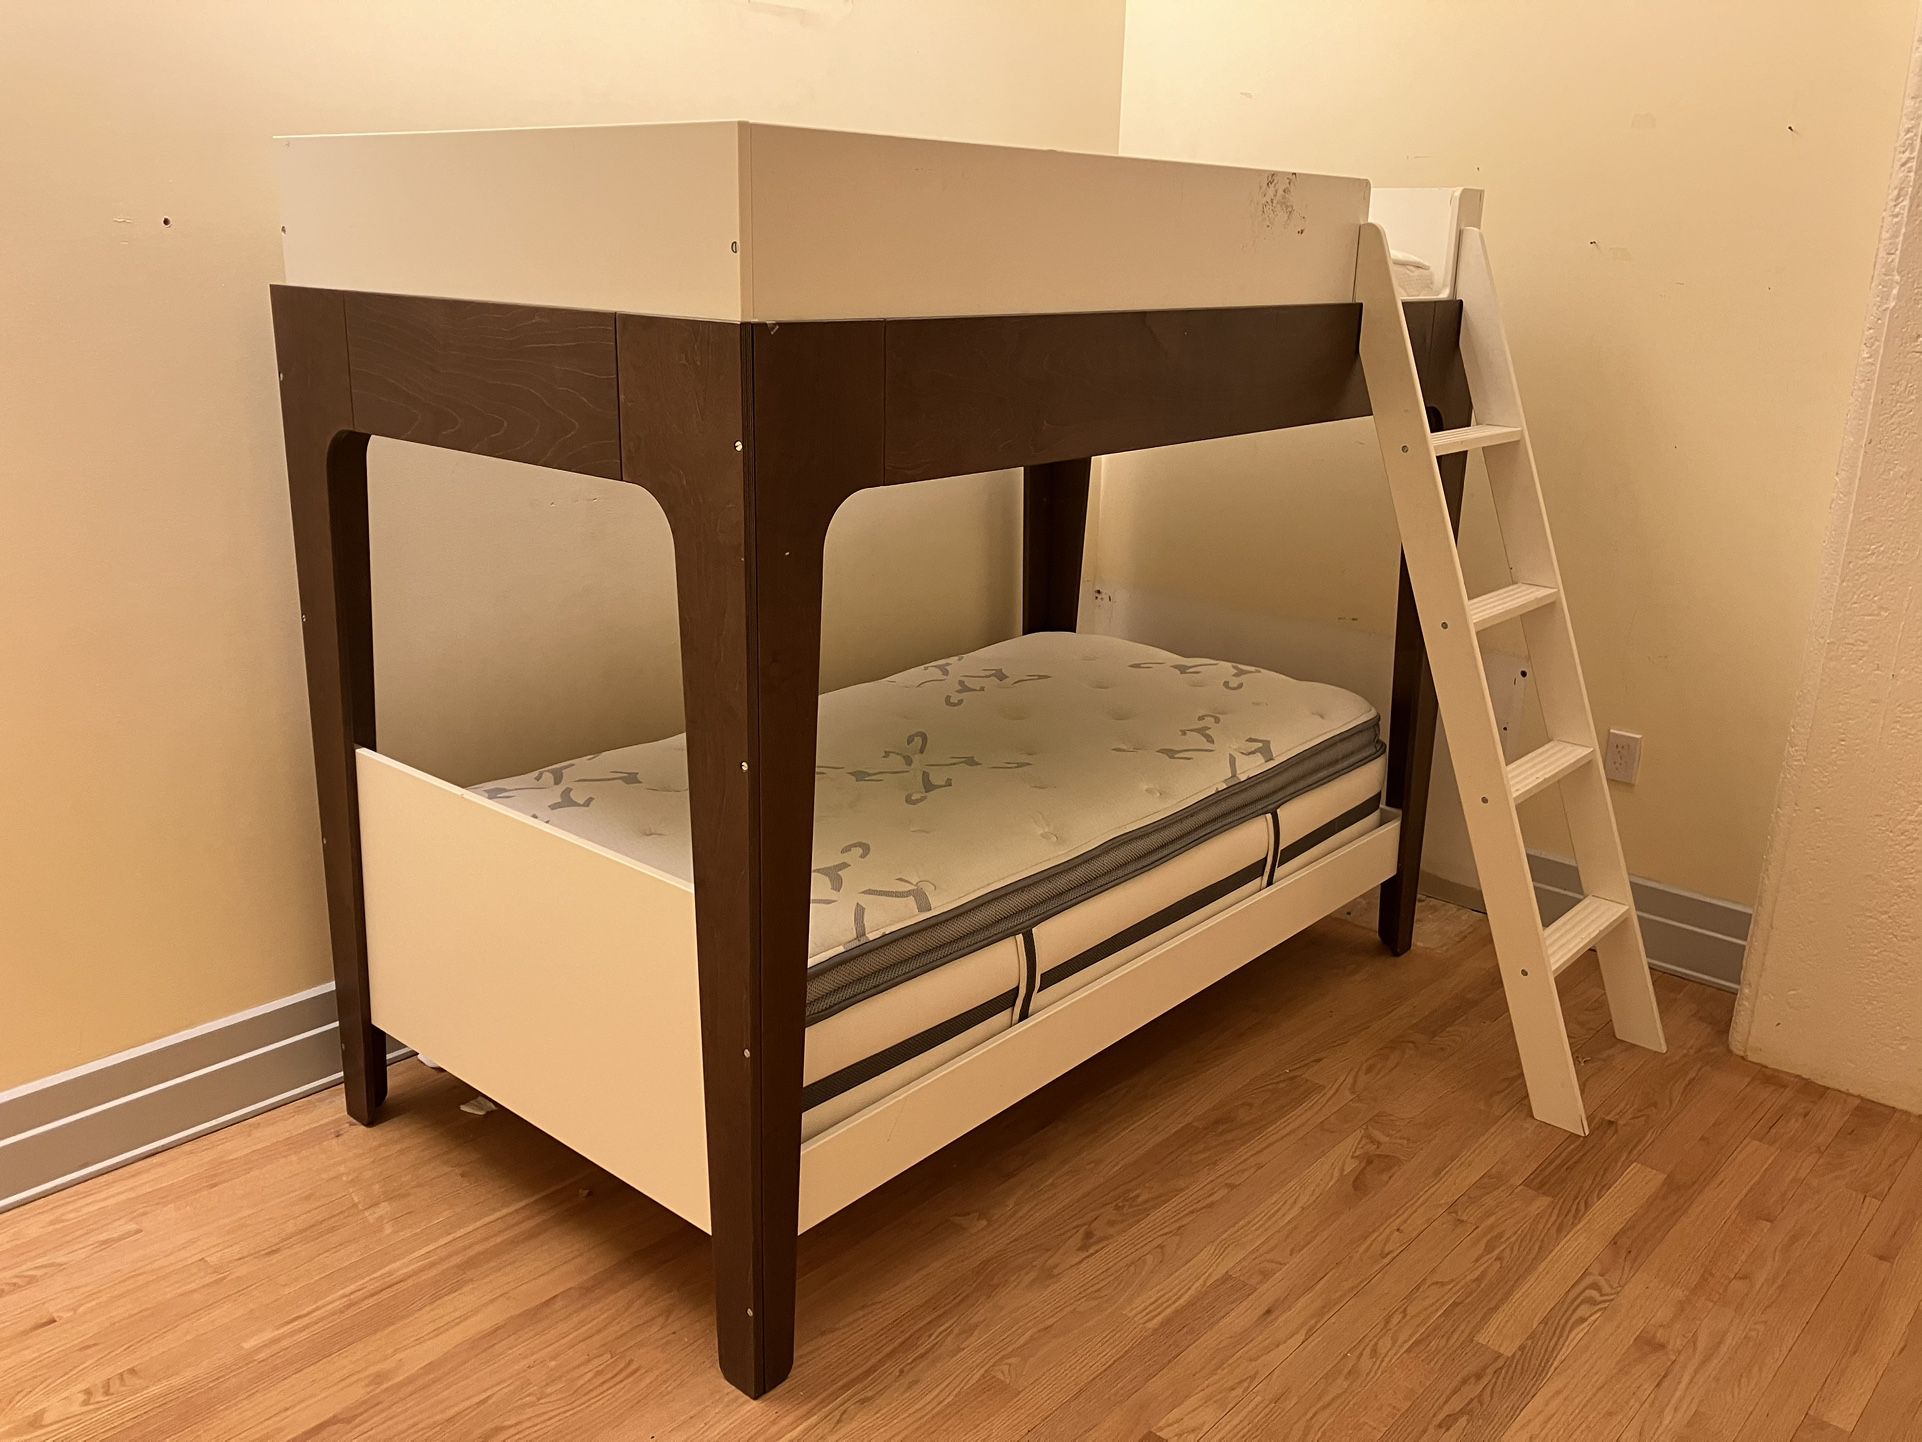 Oeuf Perch Bunk Beds (twin size)